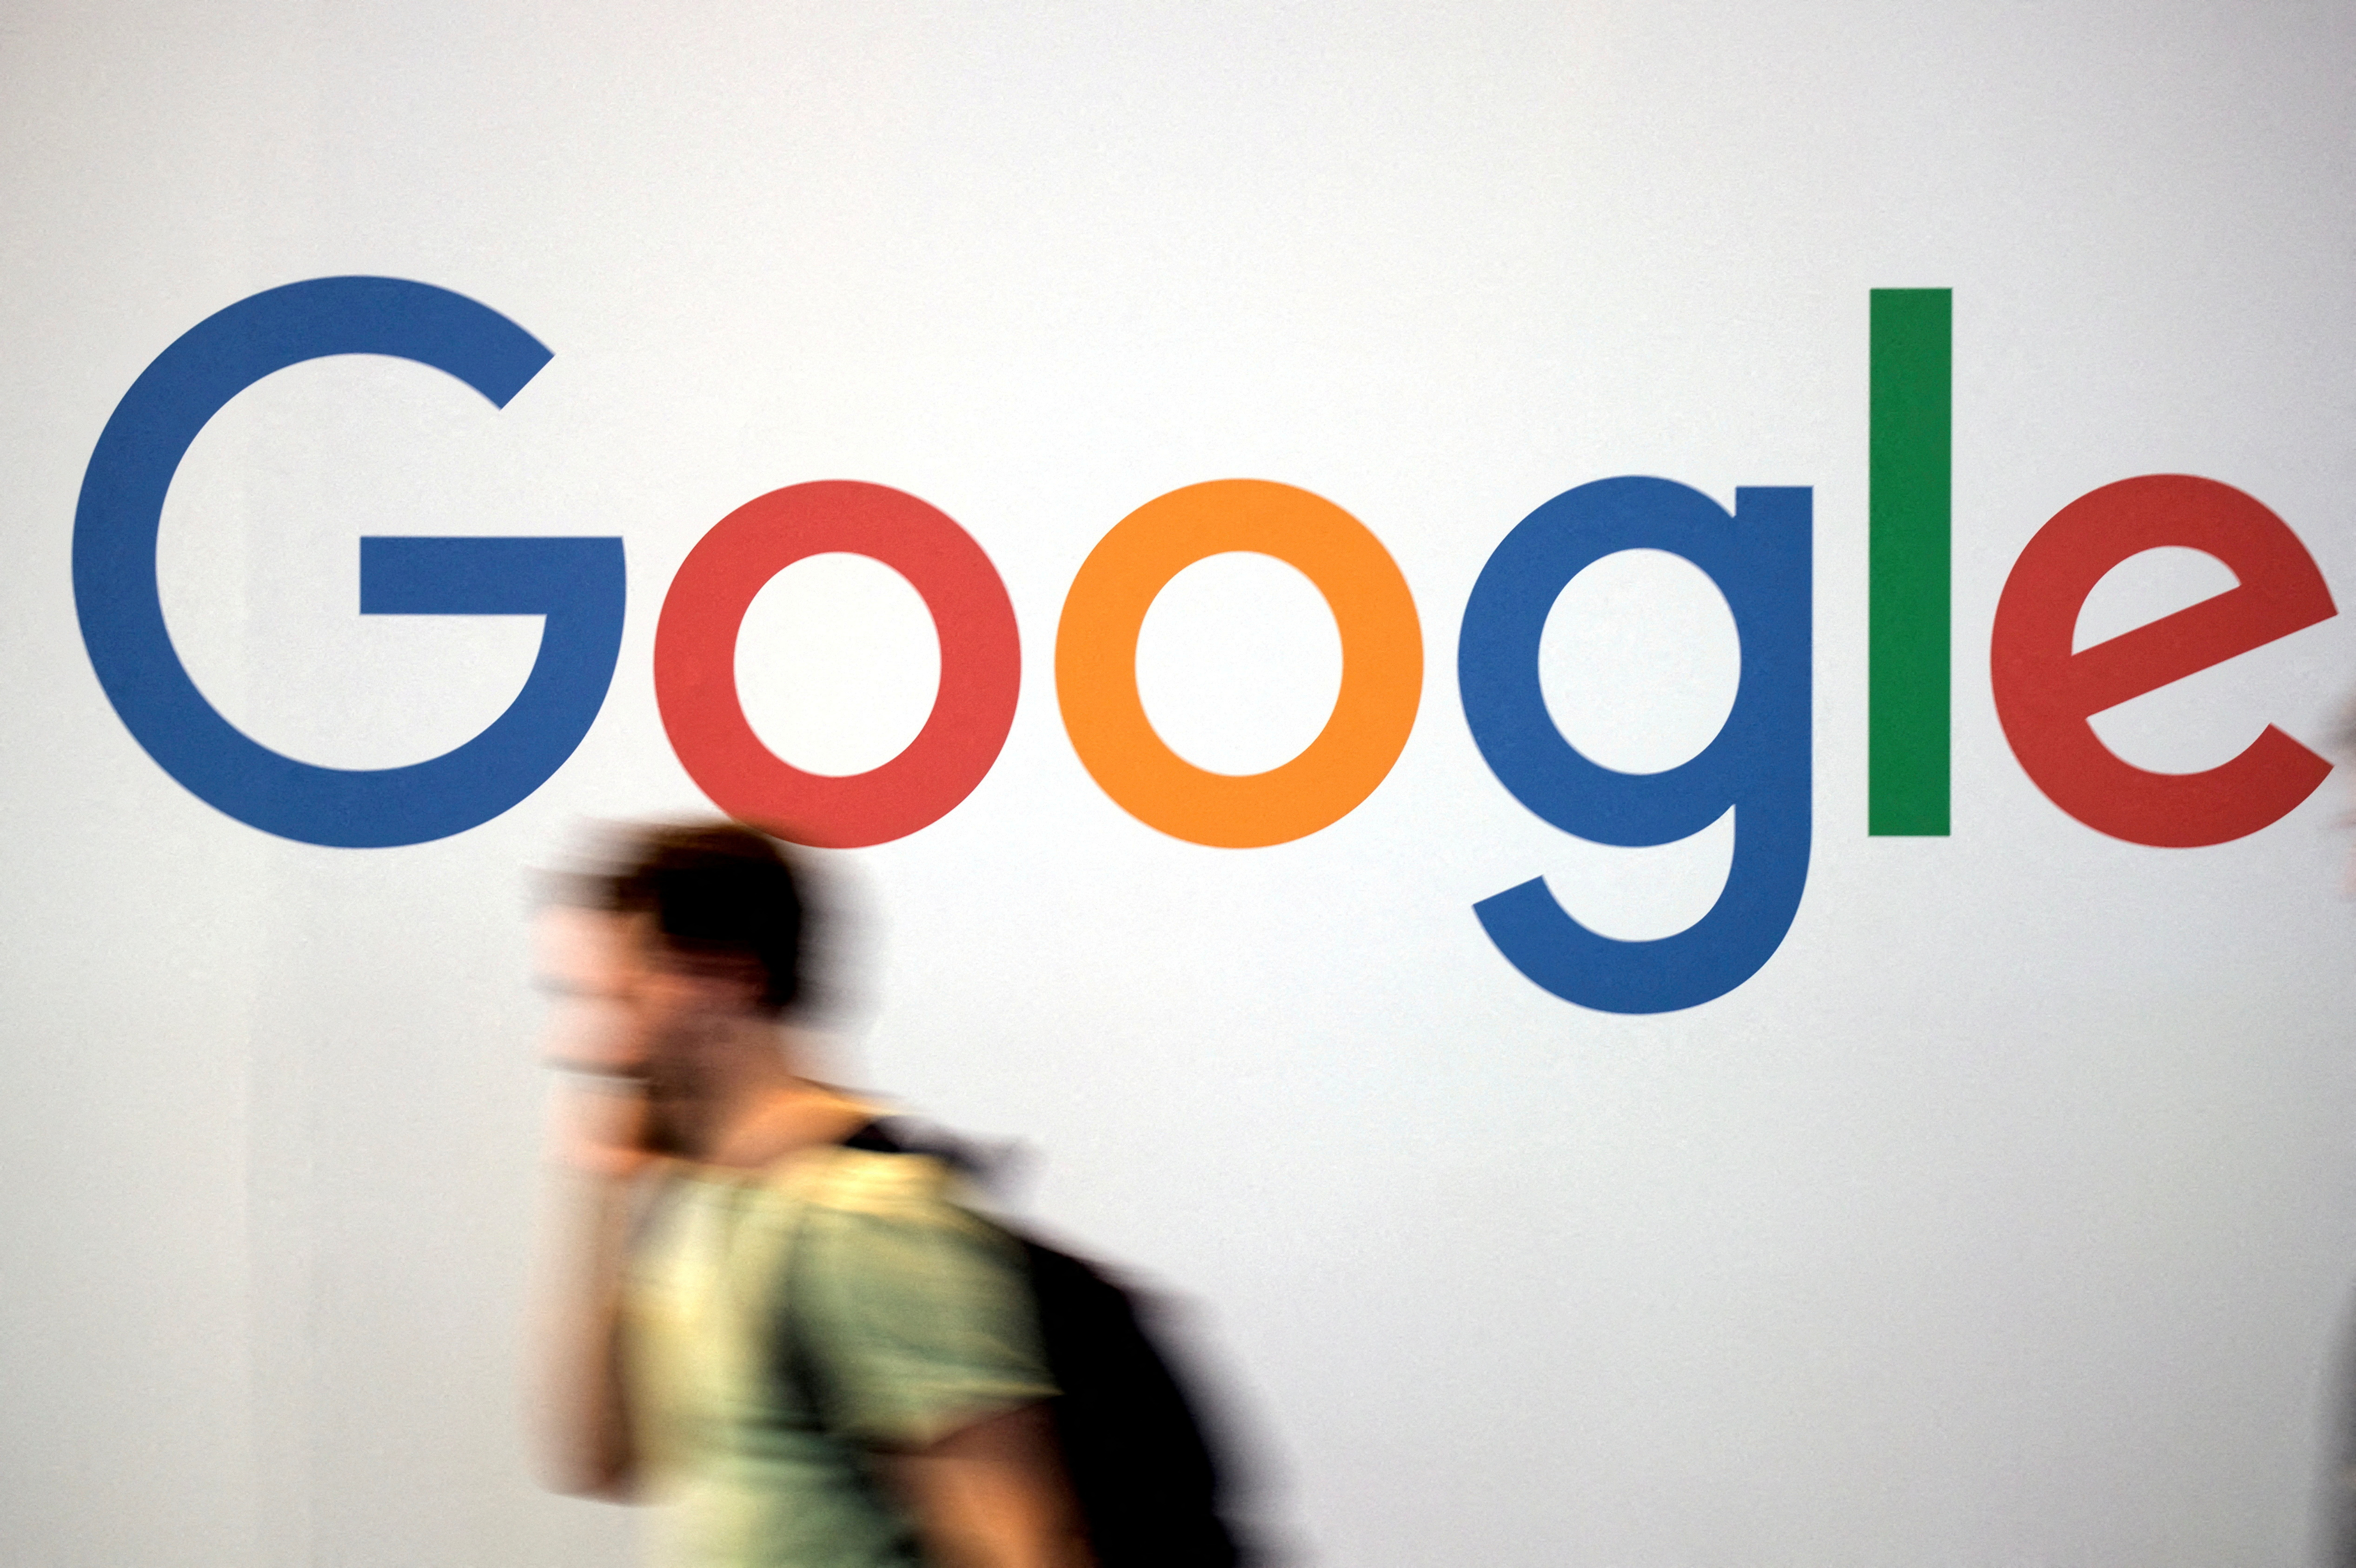 The logo of Google is pictured during the Viva Tech start-up and technology summit in Paris